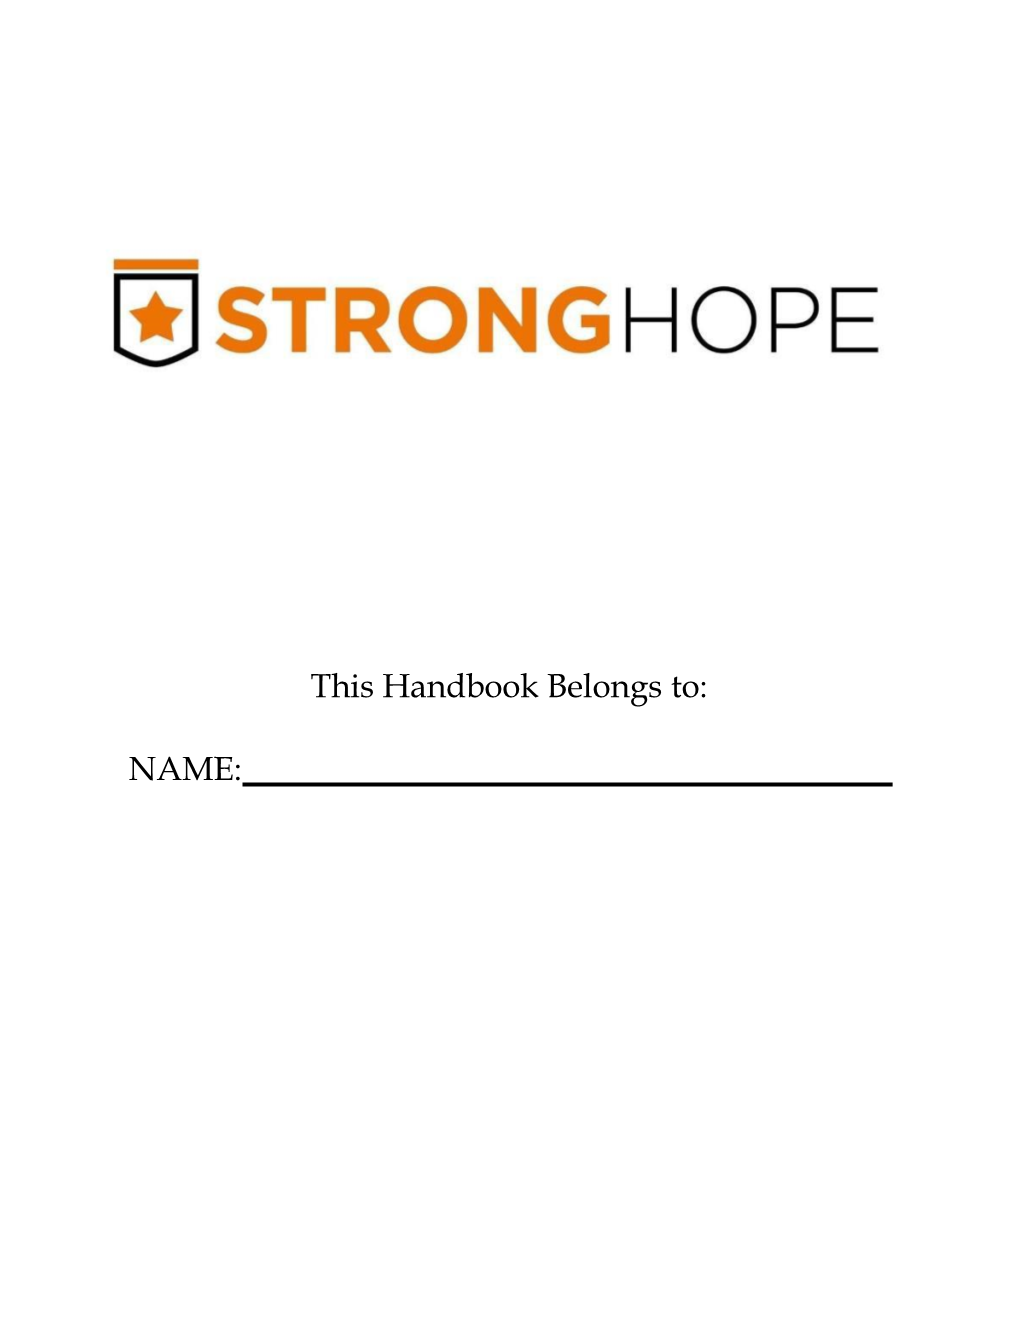 The Strong Hope Military Program